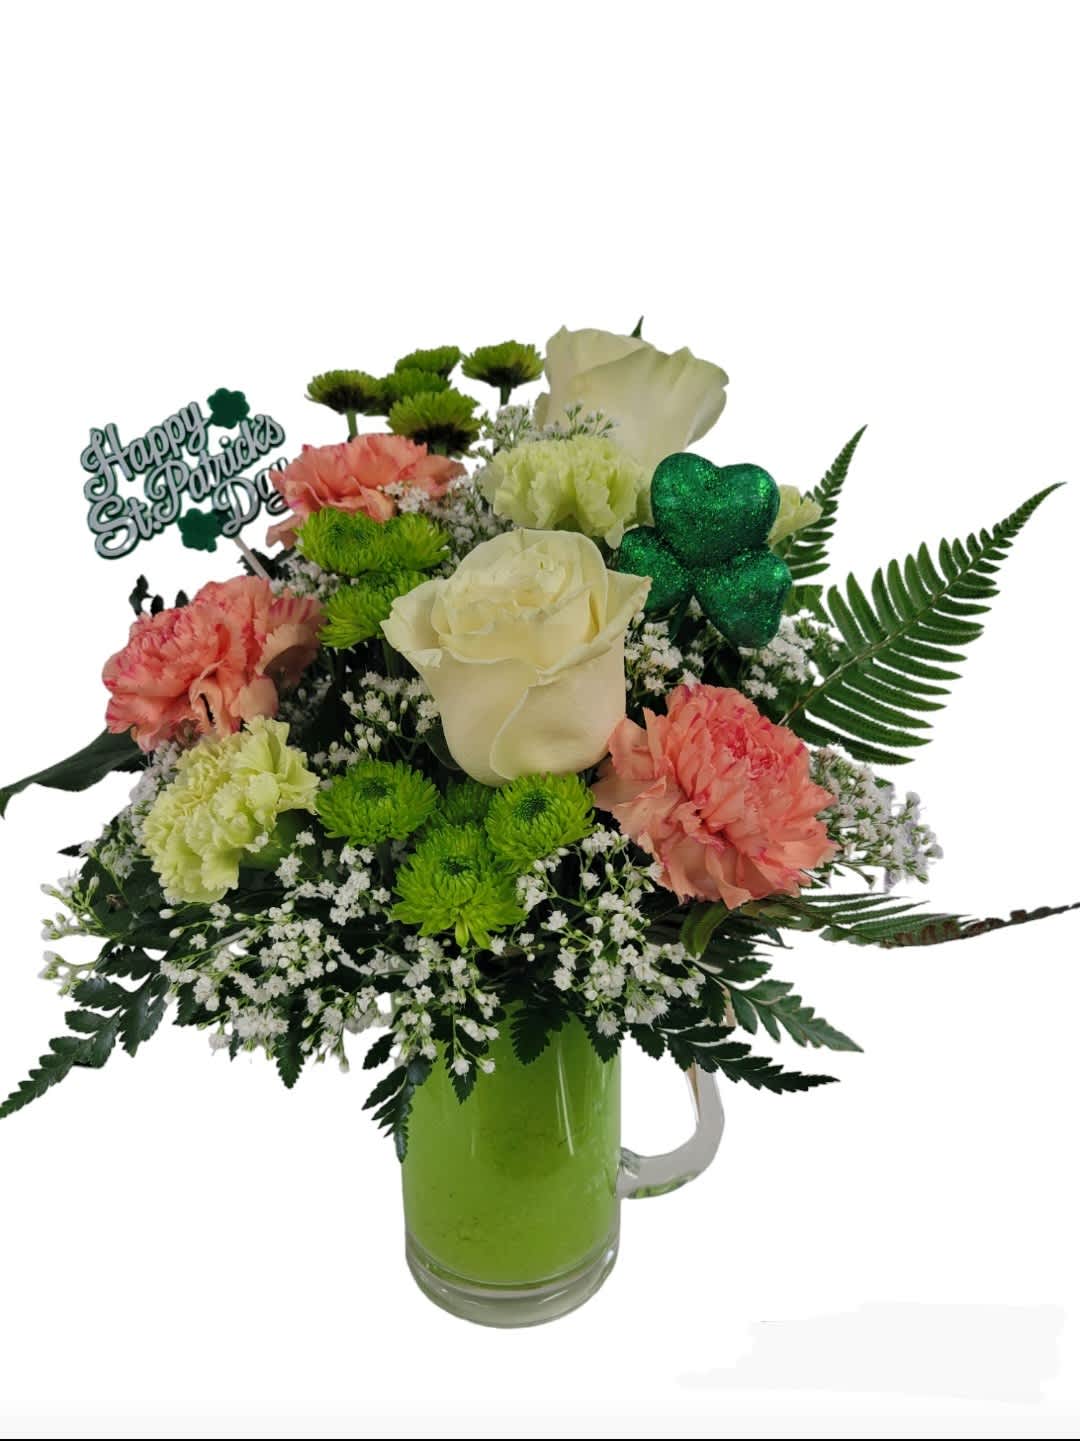 Shenanigans - LOCAL - A beer mug filled with fun flowers - green carnations, white roses, green buttons and some orange thrown in there.  Great idea for St. Patrick's Day party!!